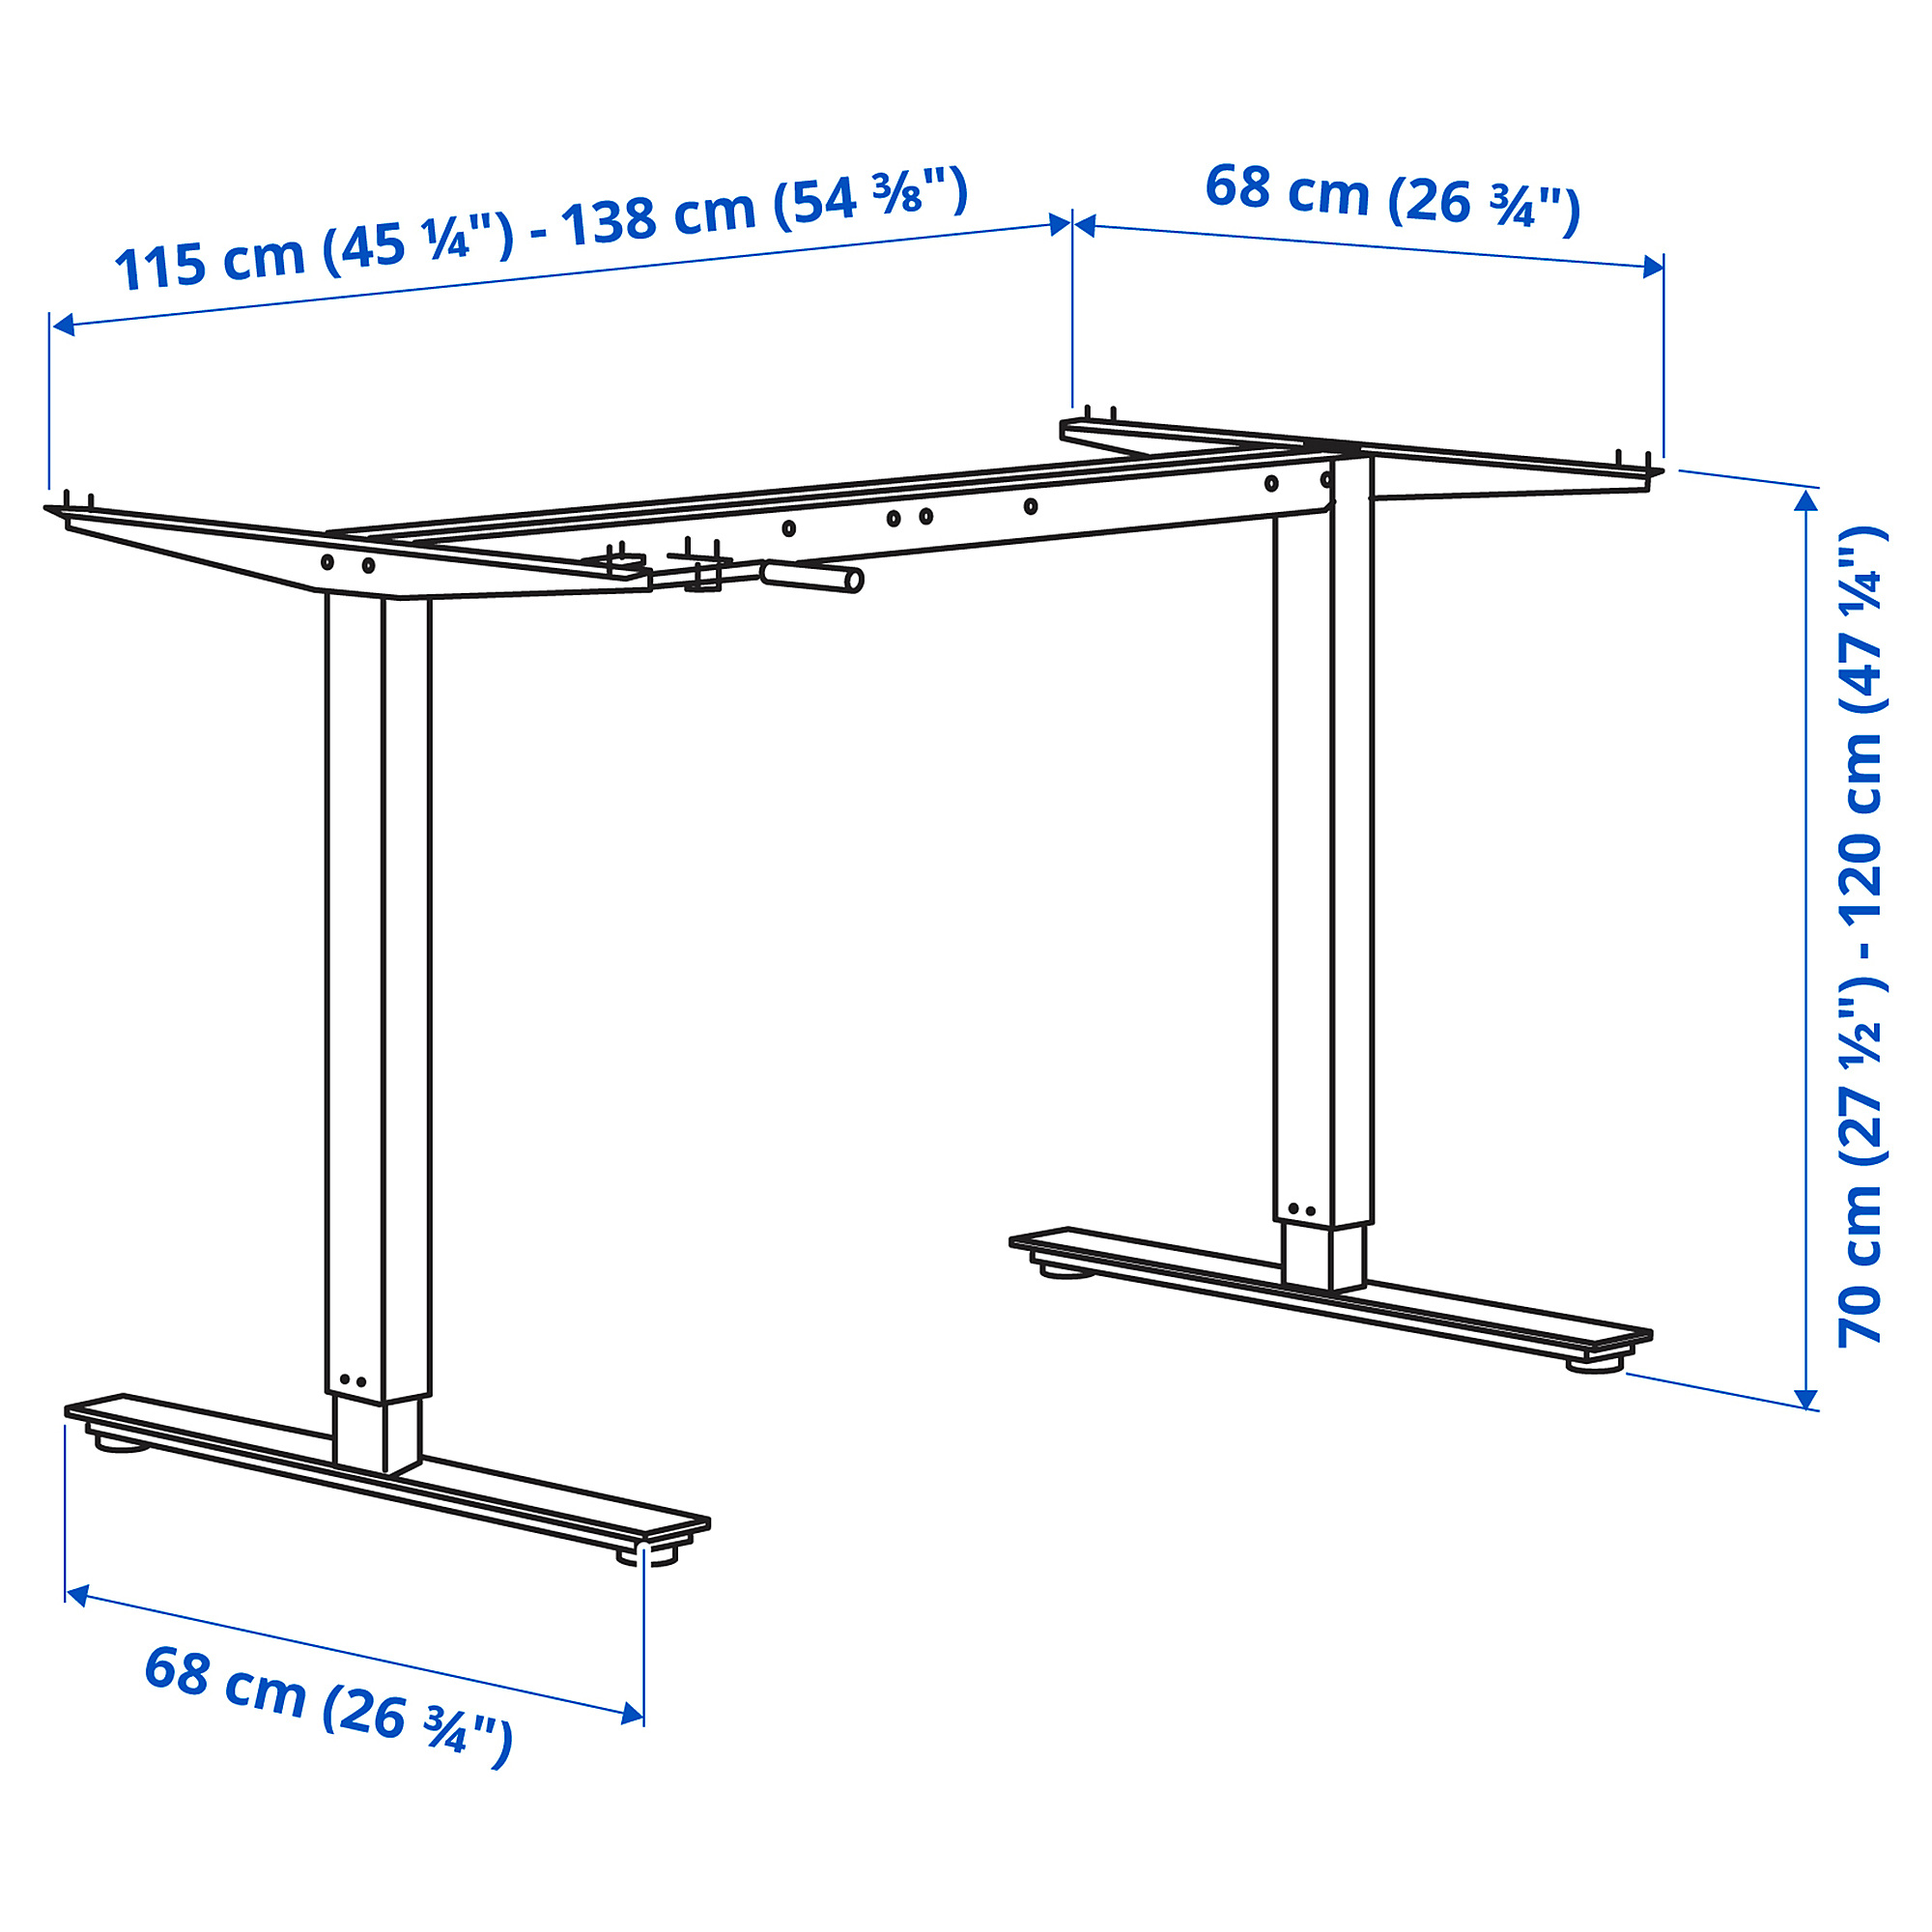 TROTTEN underframe sit/stand f table top